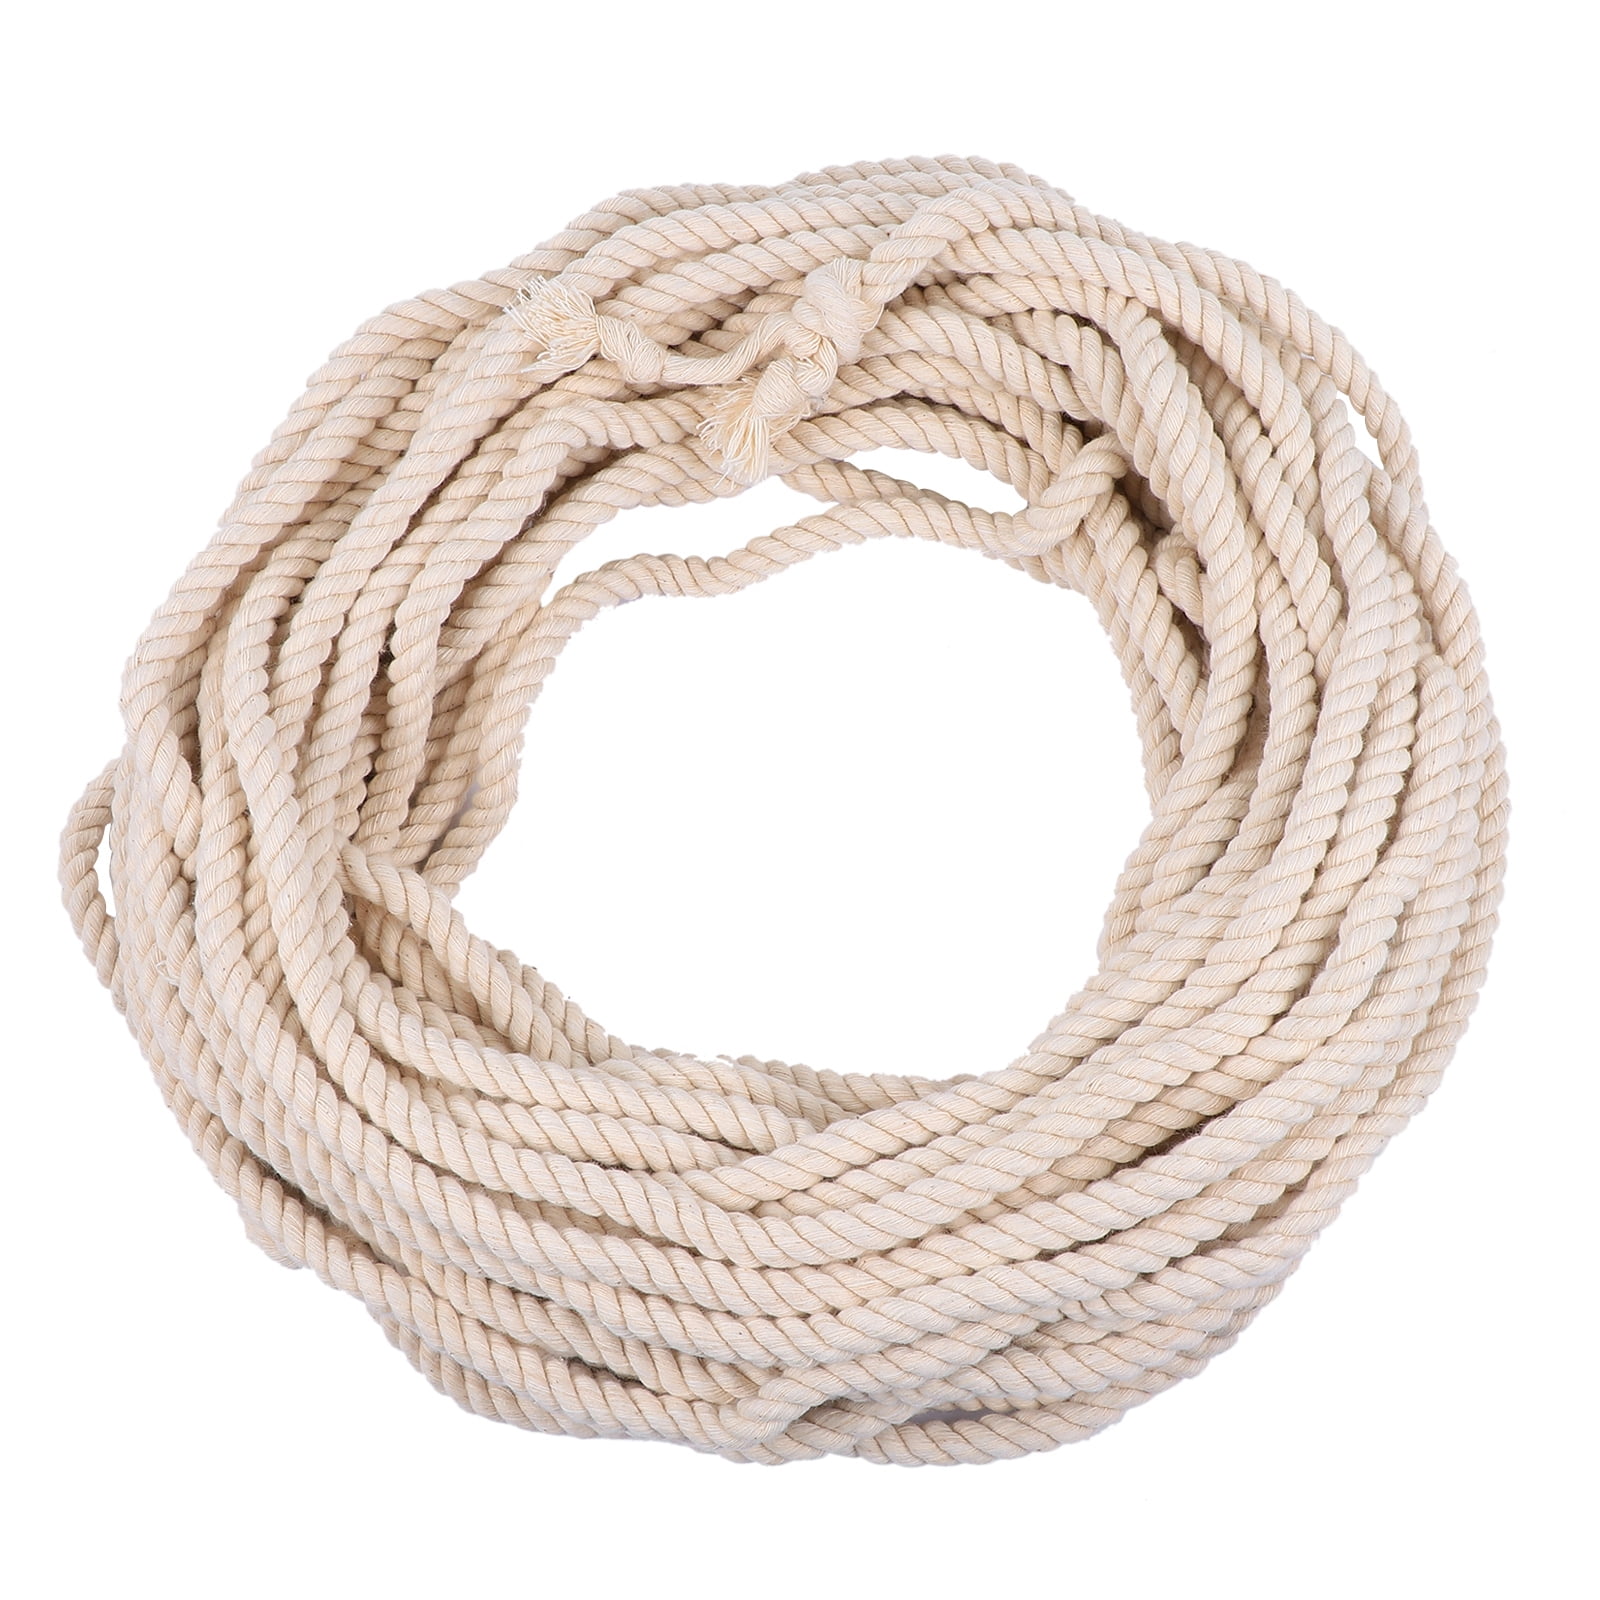 100% Cotton Rope Spool - Made in America - 5/16 Solid Braid Rope - 500 ft.  Spool — The Mountain Thread Company (TM)